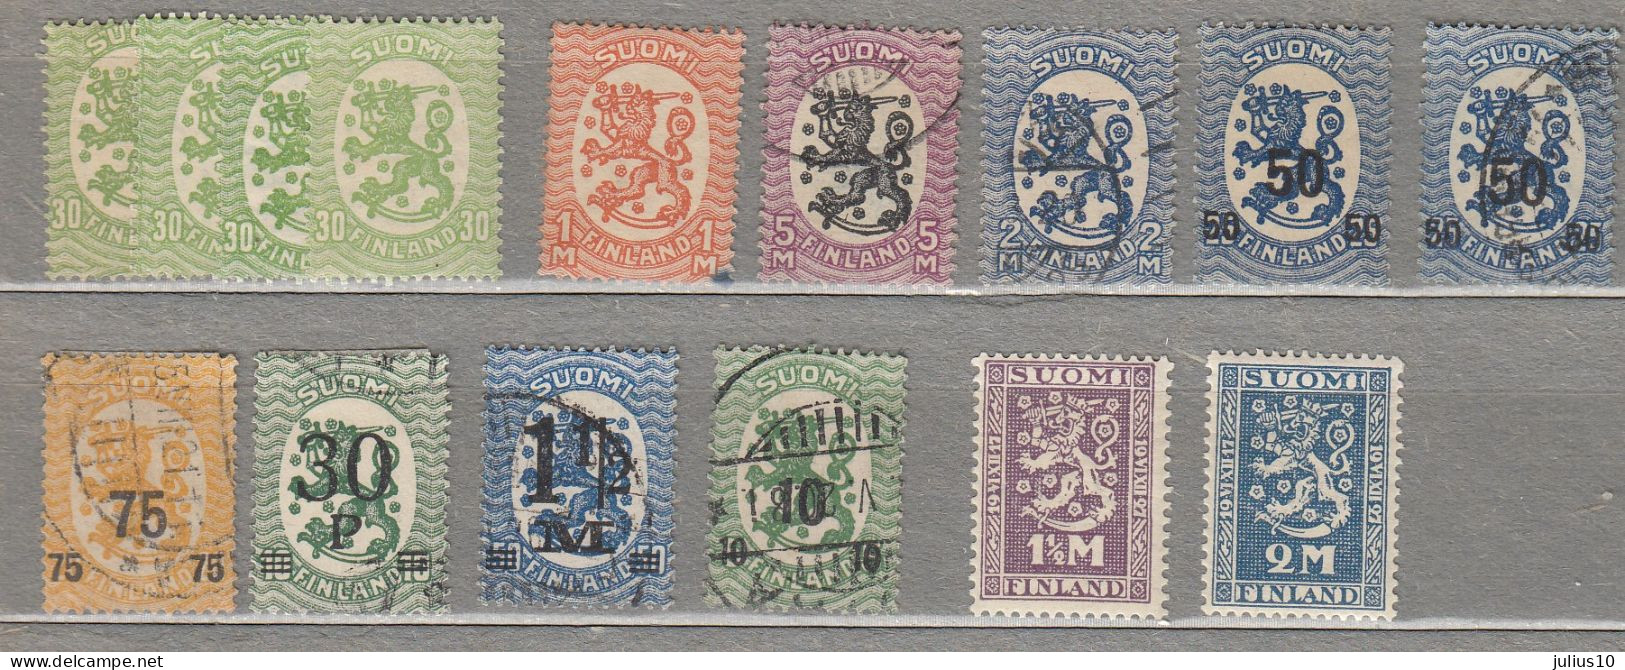 FINLAND 1917-1927 Used/Mint Stamps #22623 - Used Stamps